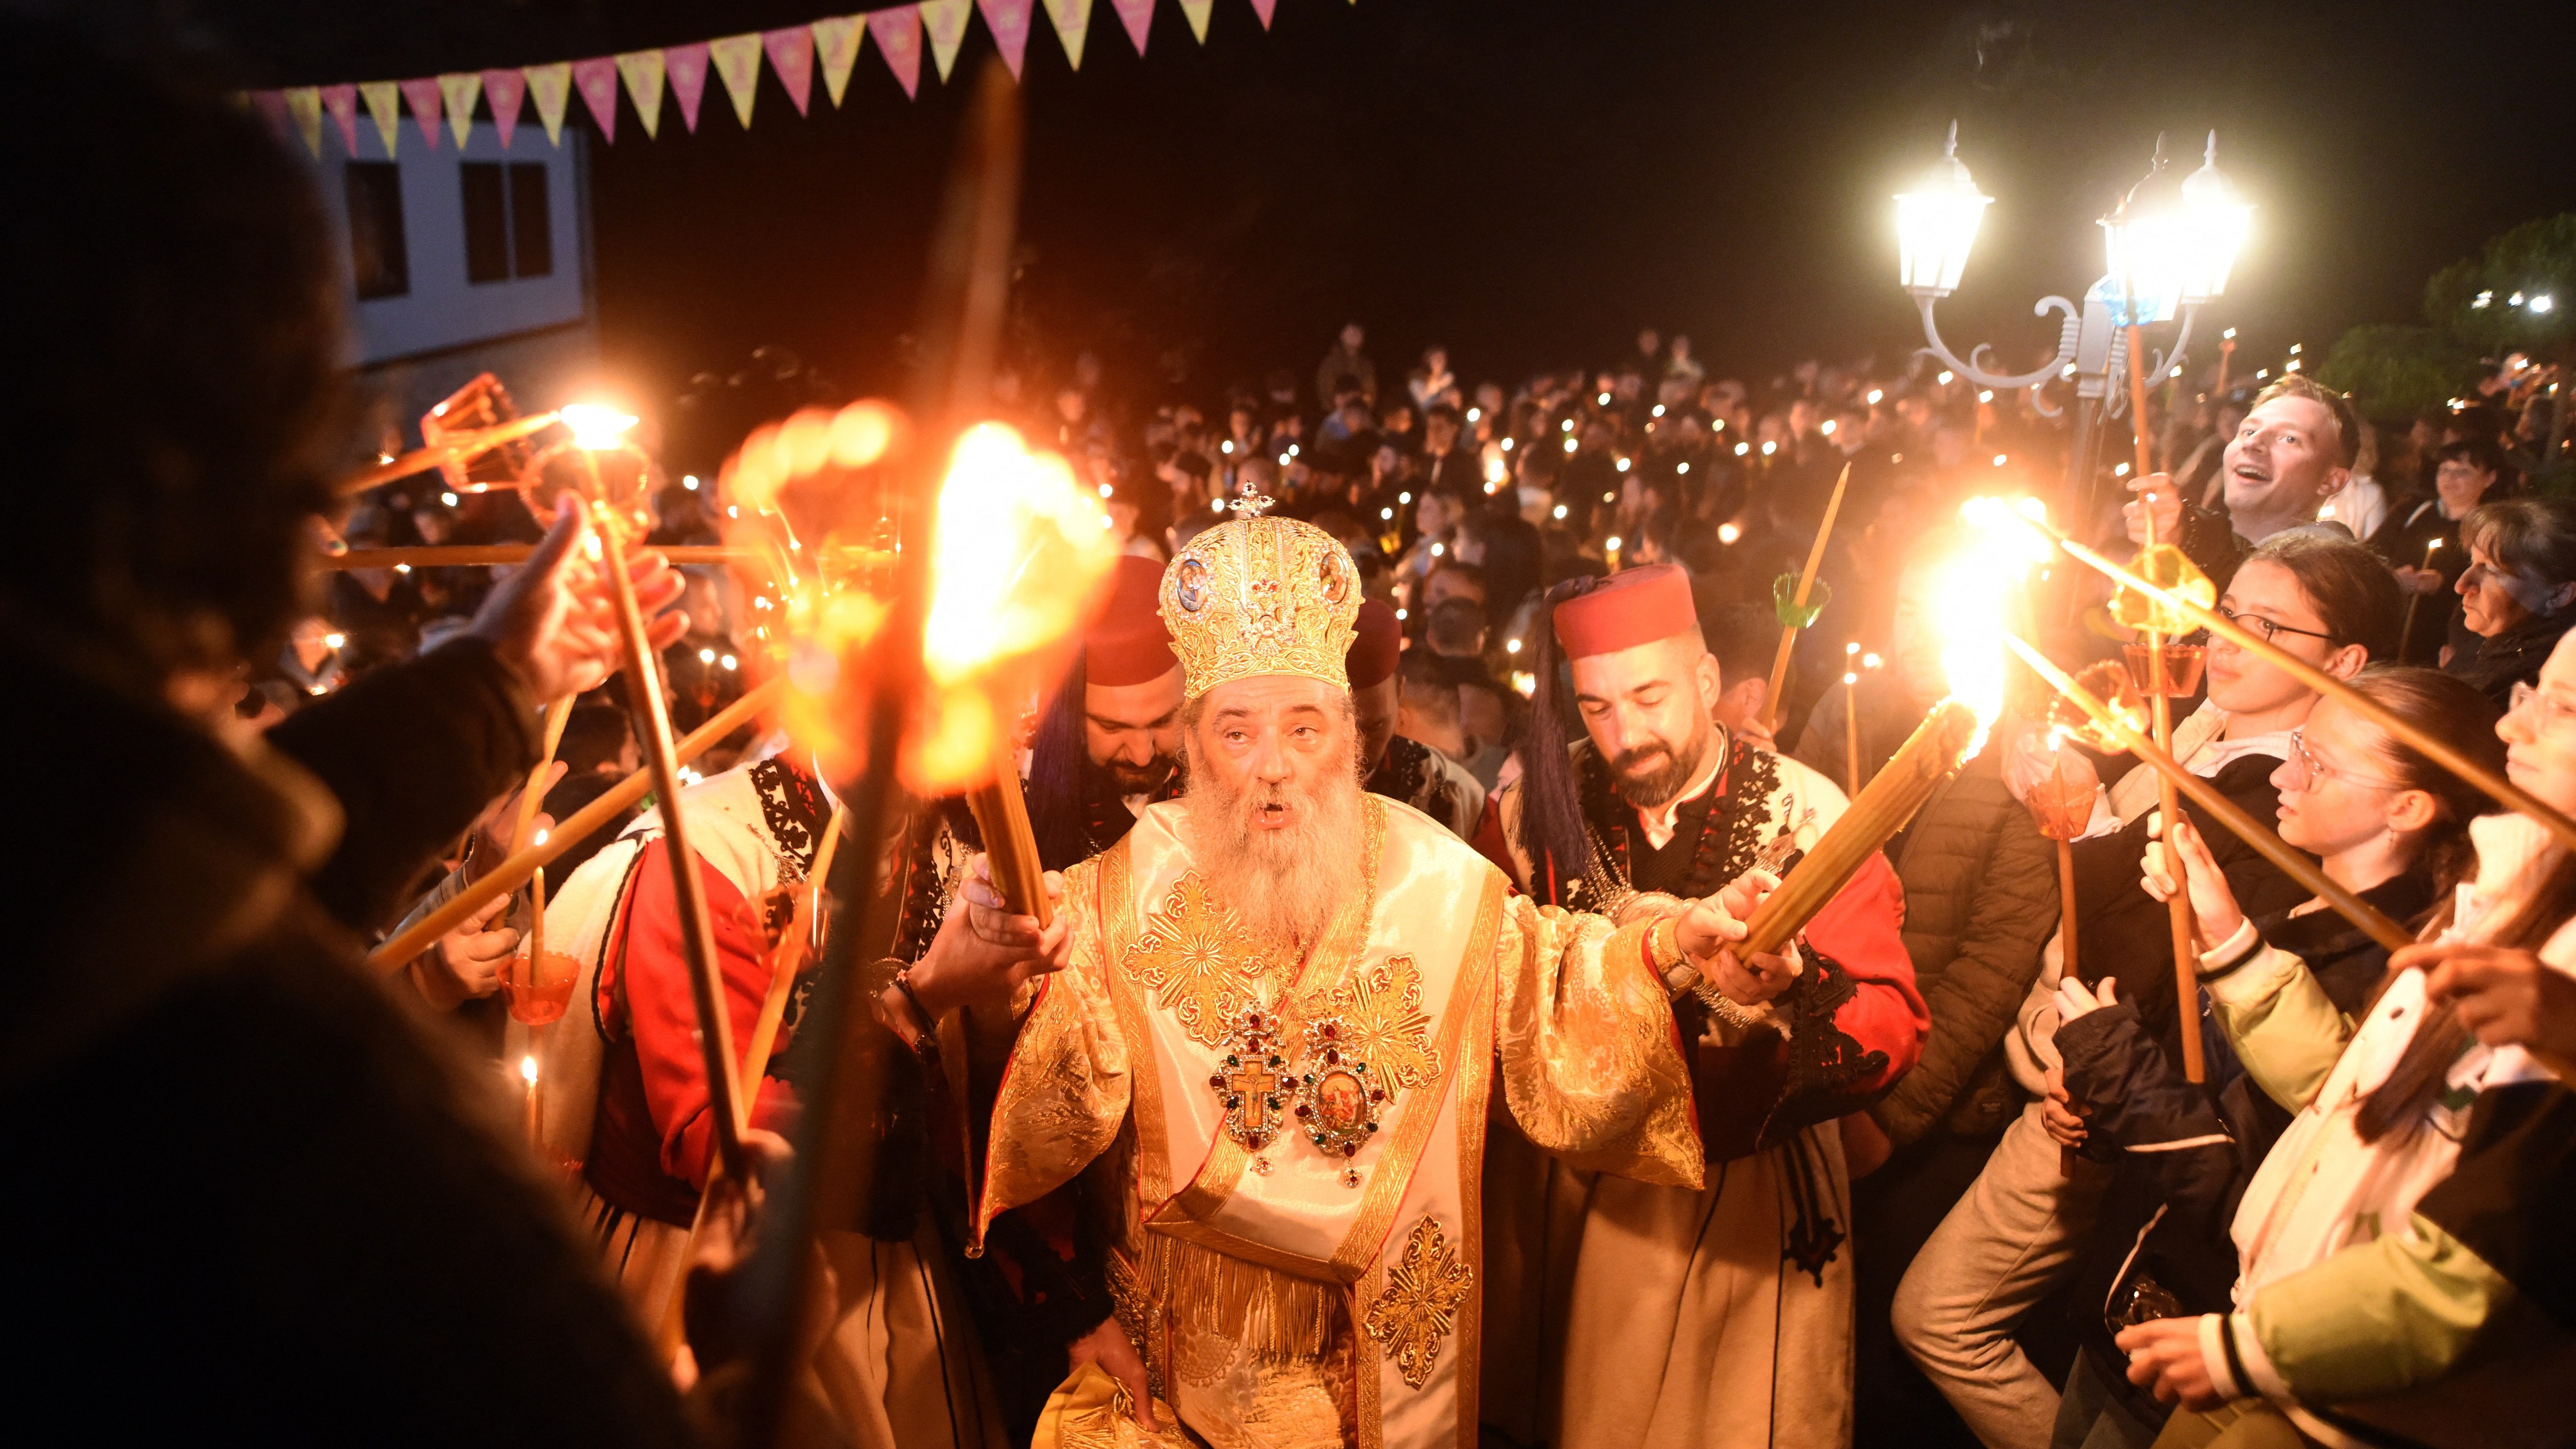 Macedonian Orthodox Christians light candles from the holy fire that arrived from Jerusalem during an Easter service at the Saint Jovan Bigorski monastery in Mavrovo